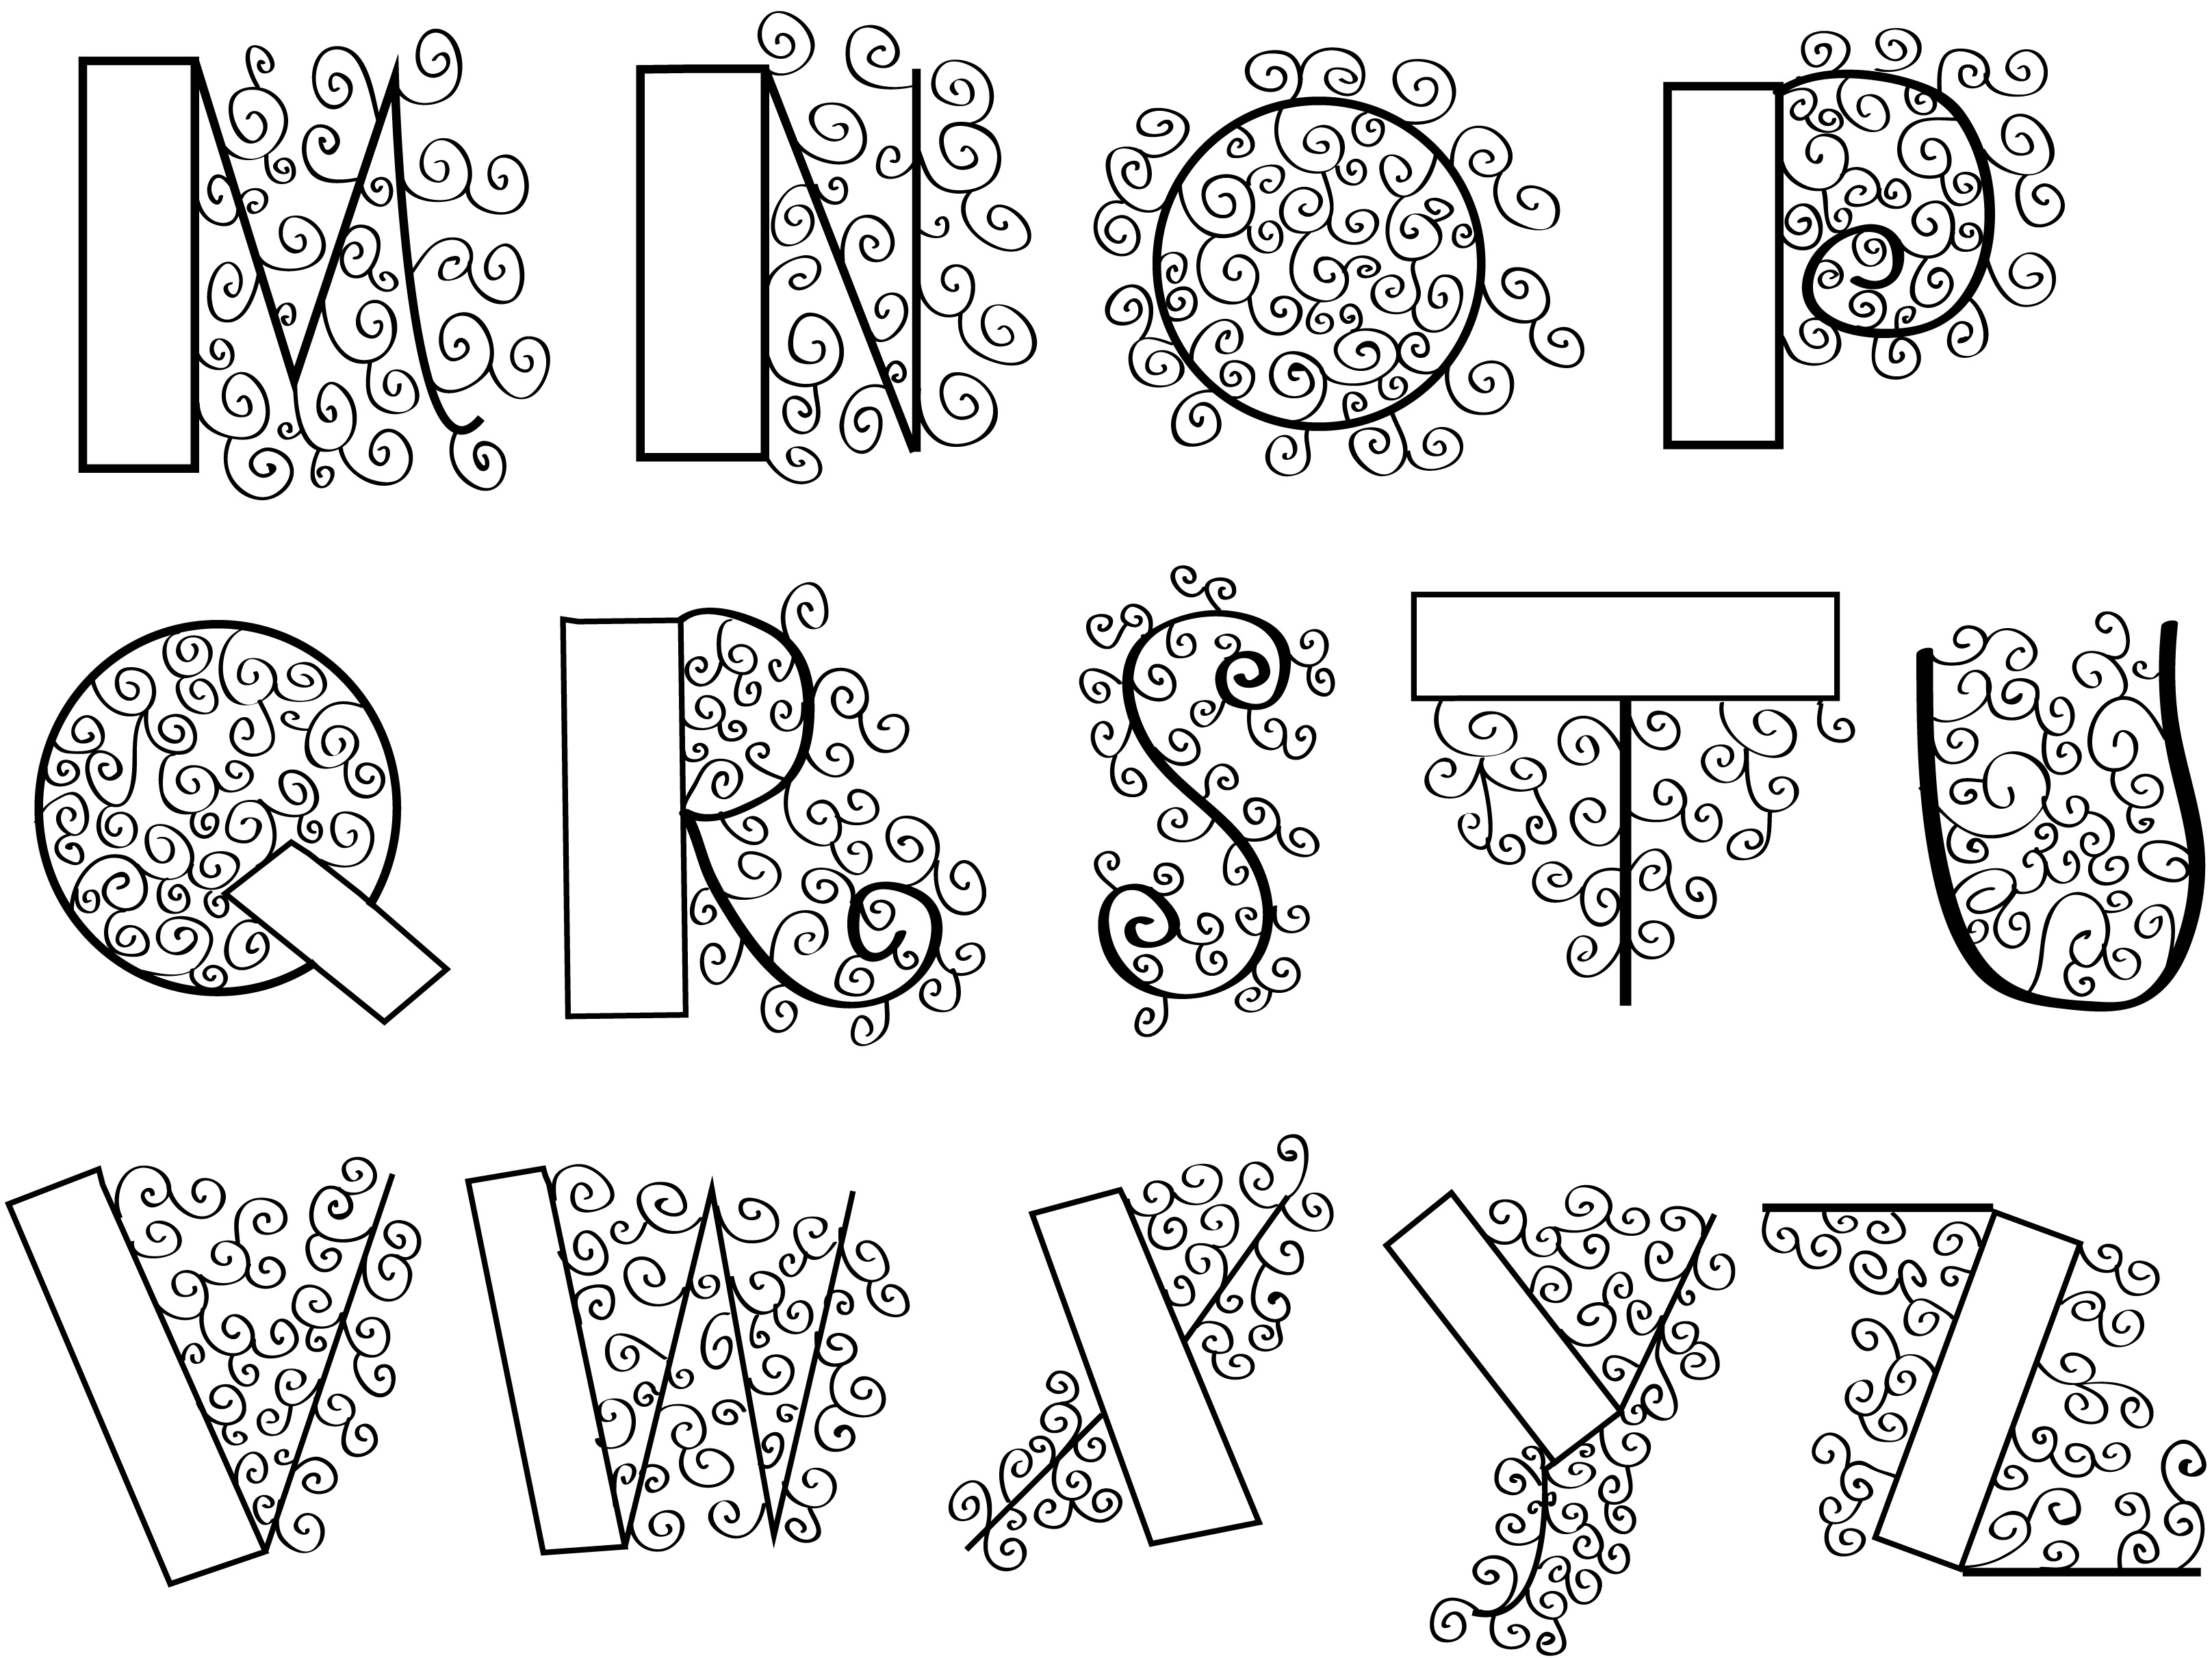 15 Cute Girly Bubble Fonts Images Cute Girly Bubble Letters